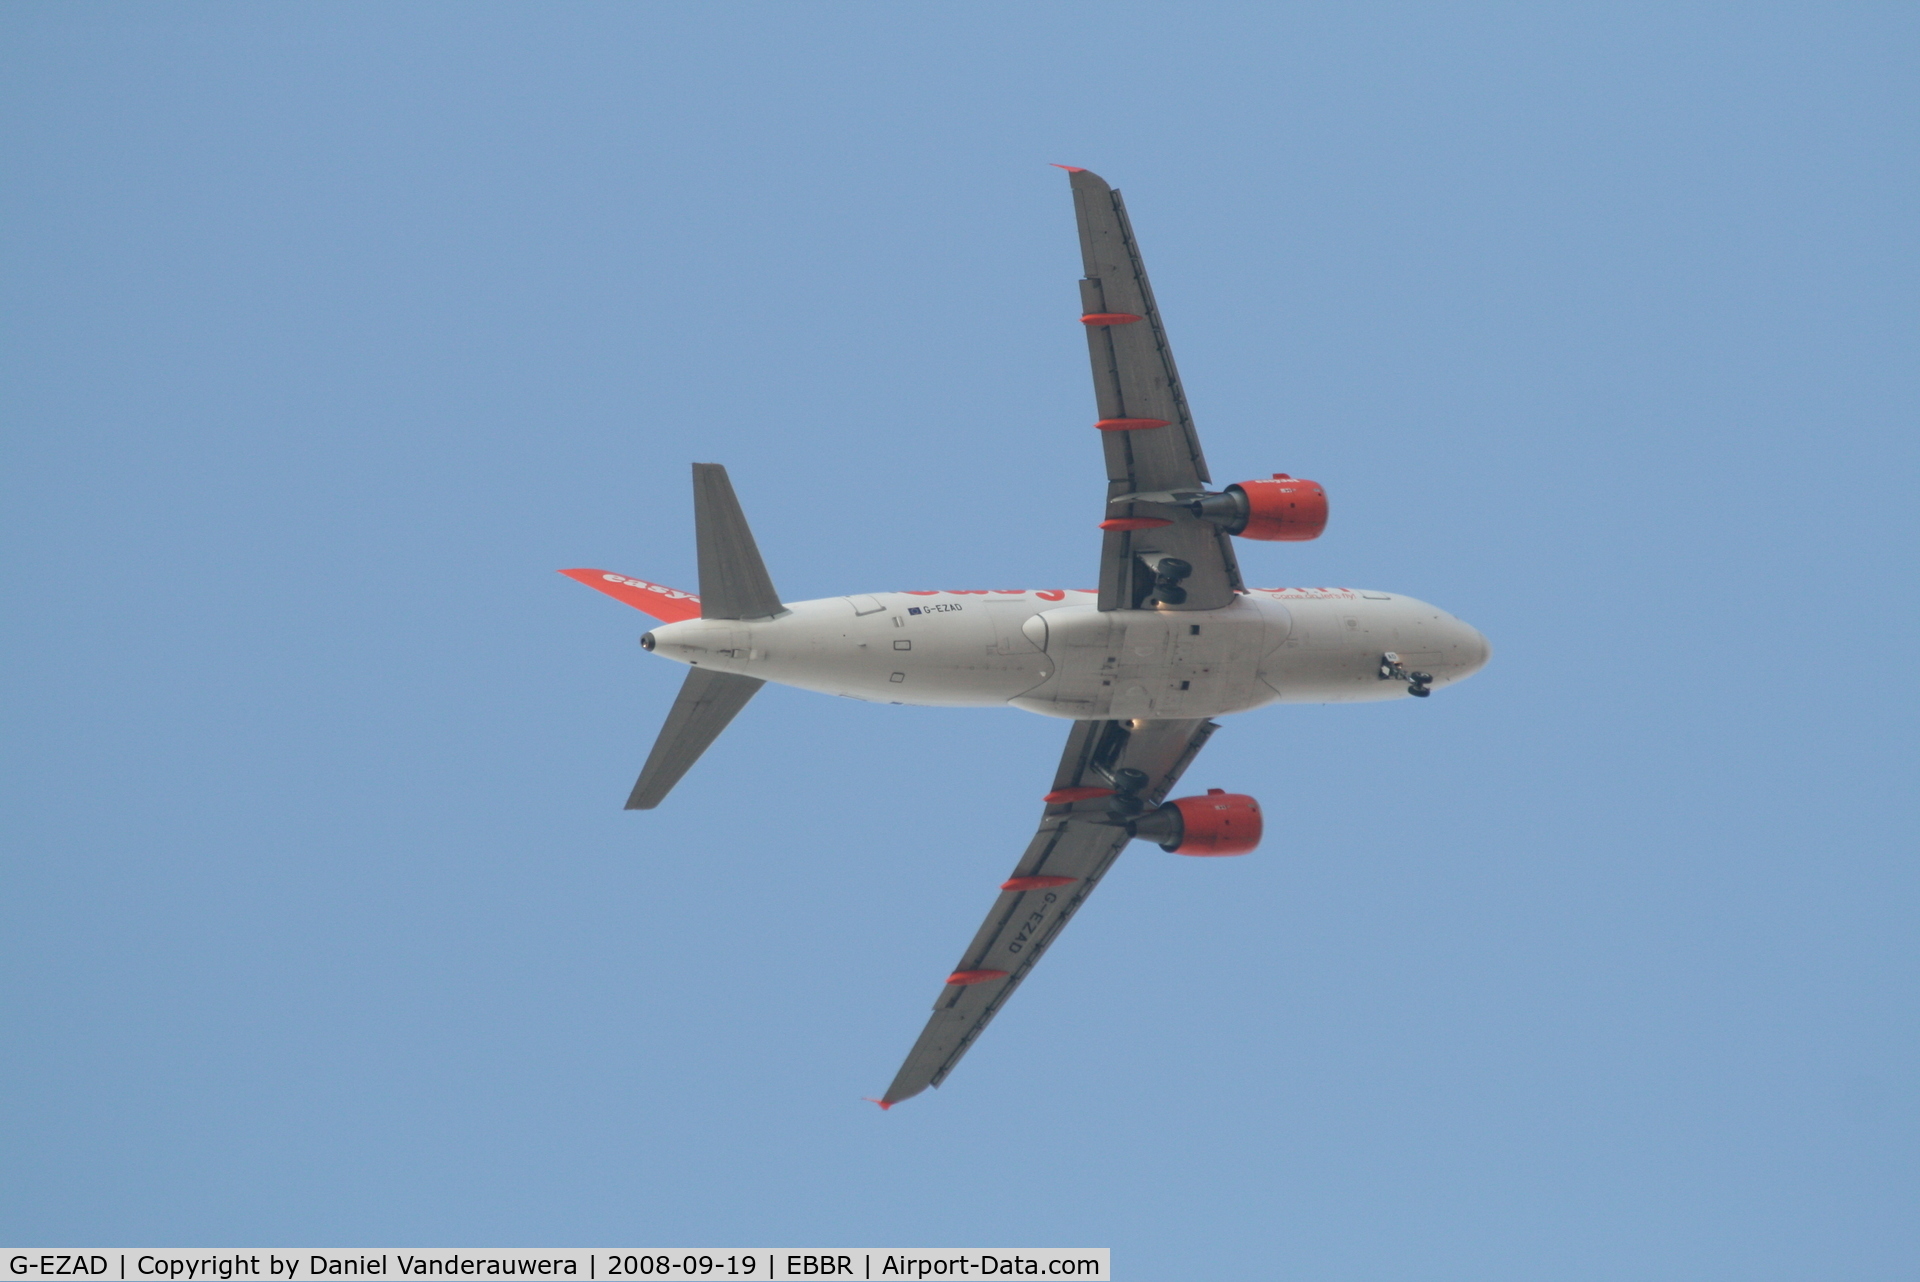 G-EZAD, 2006 Airbus A319-111 C/N 2702, on approach to rwy 07L